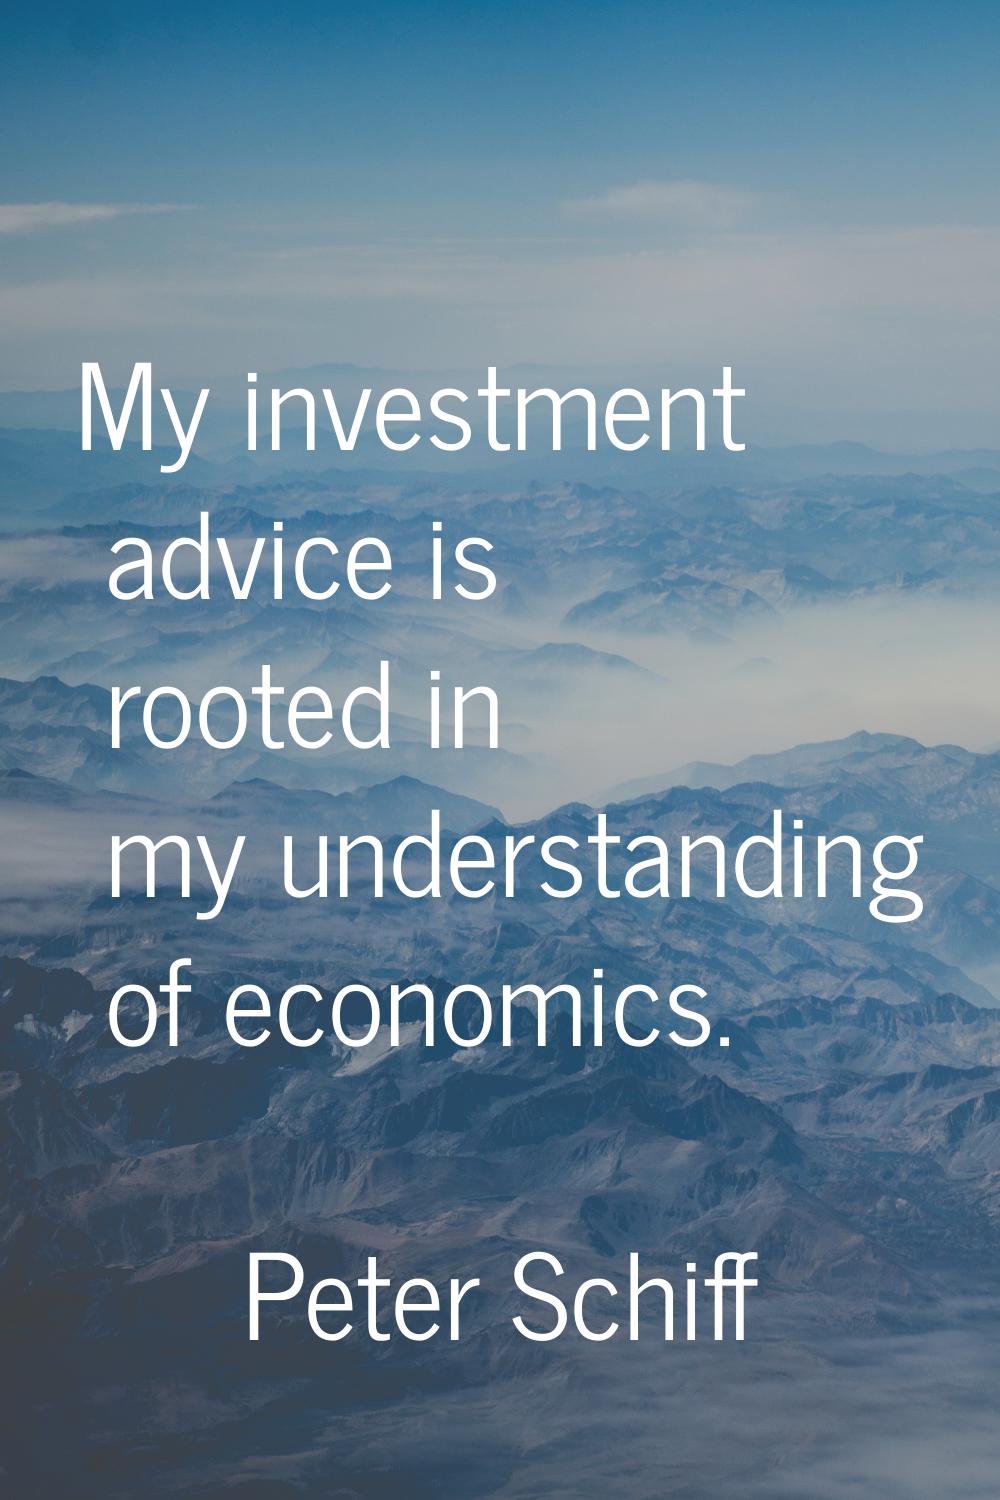 My investment advice is rooted in my understanding of economics.